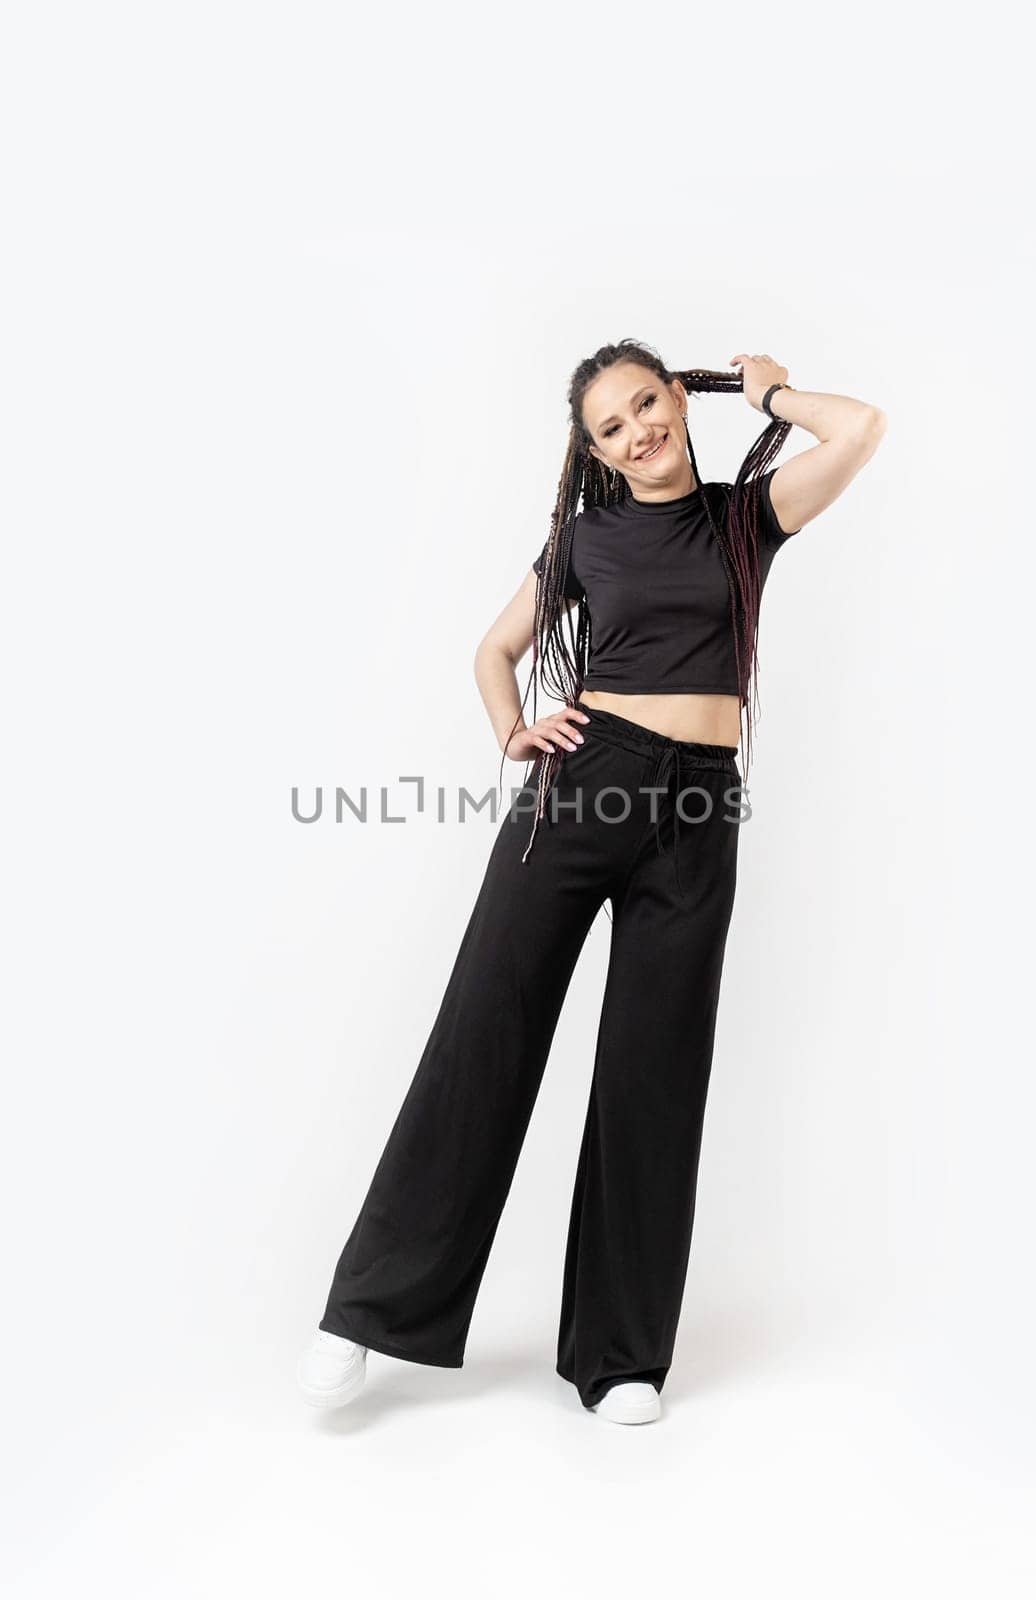 Fashionable young beautiful woman . Slim girl with dreadlocks in an active pose in black pants and top . Fashion, clothing and style.